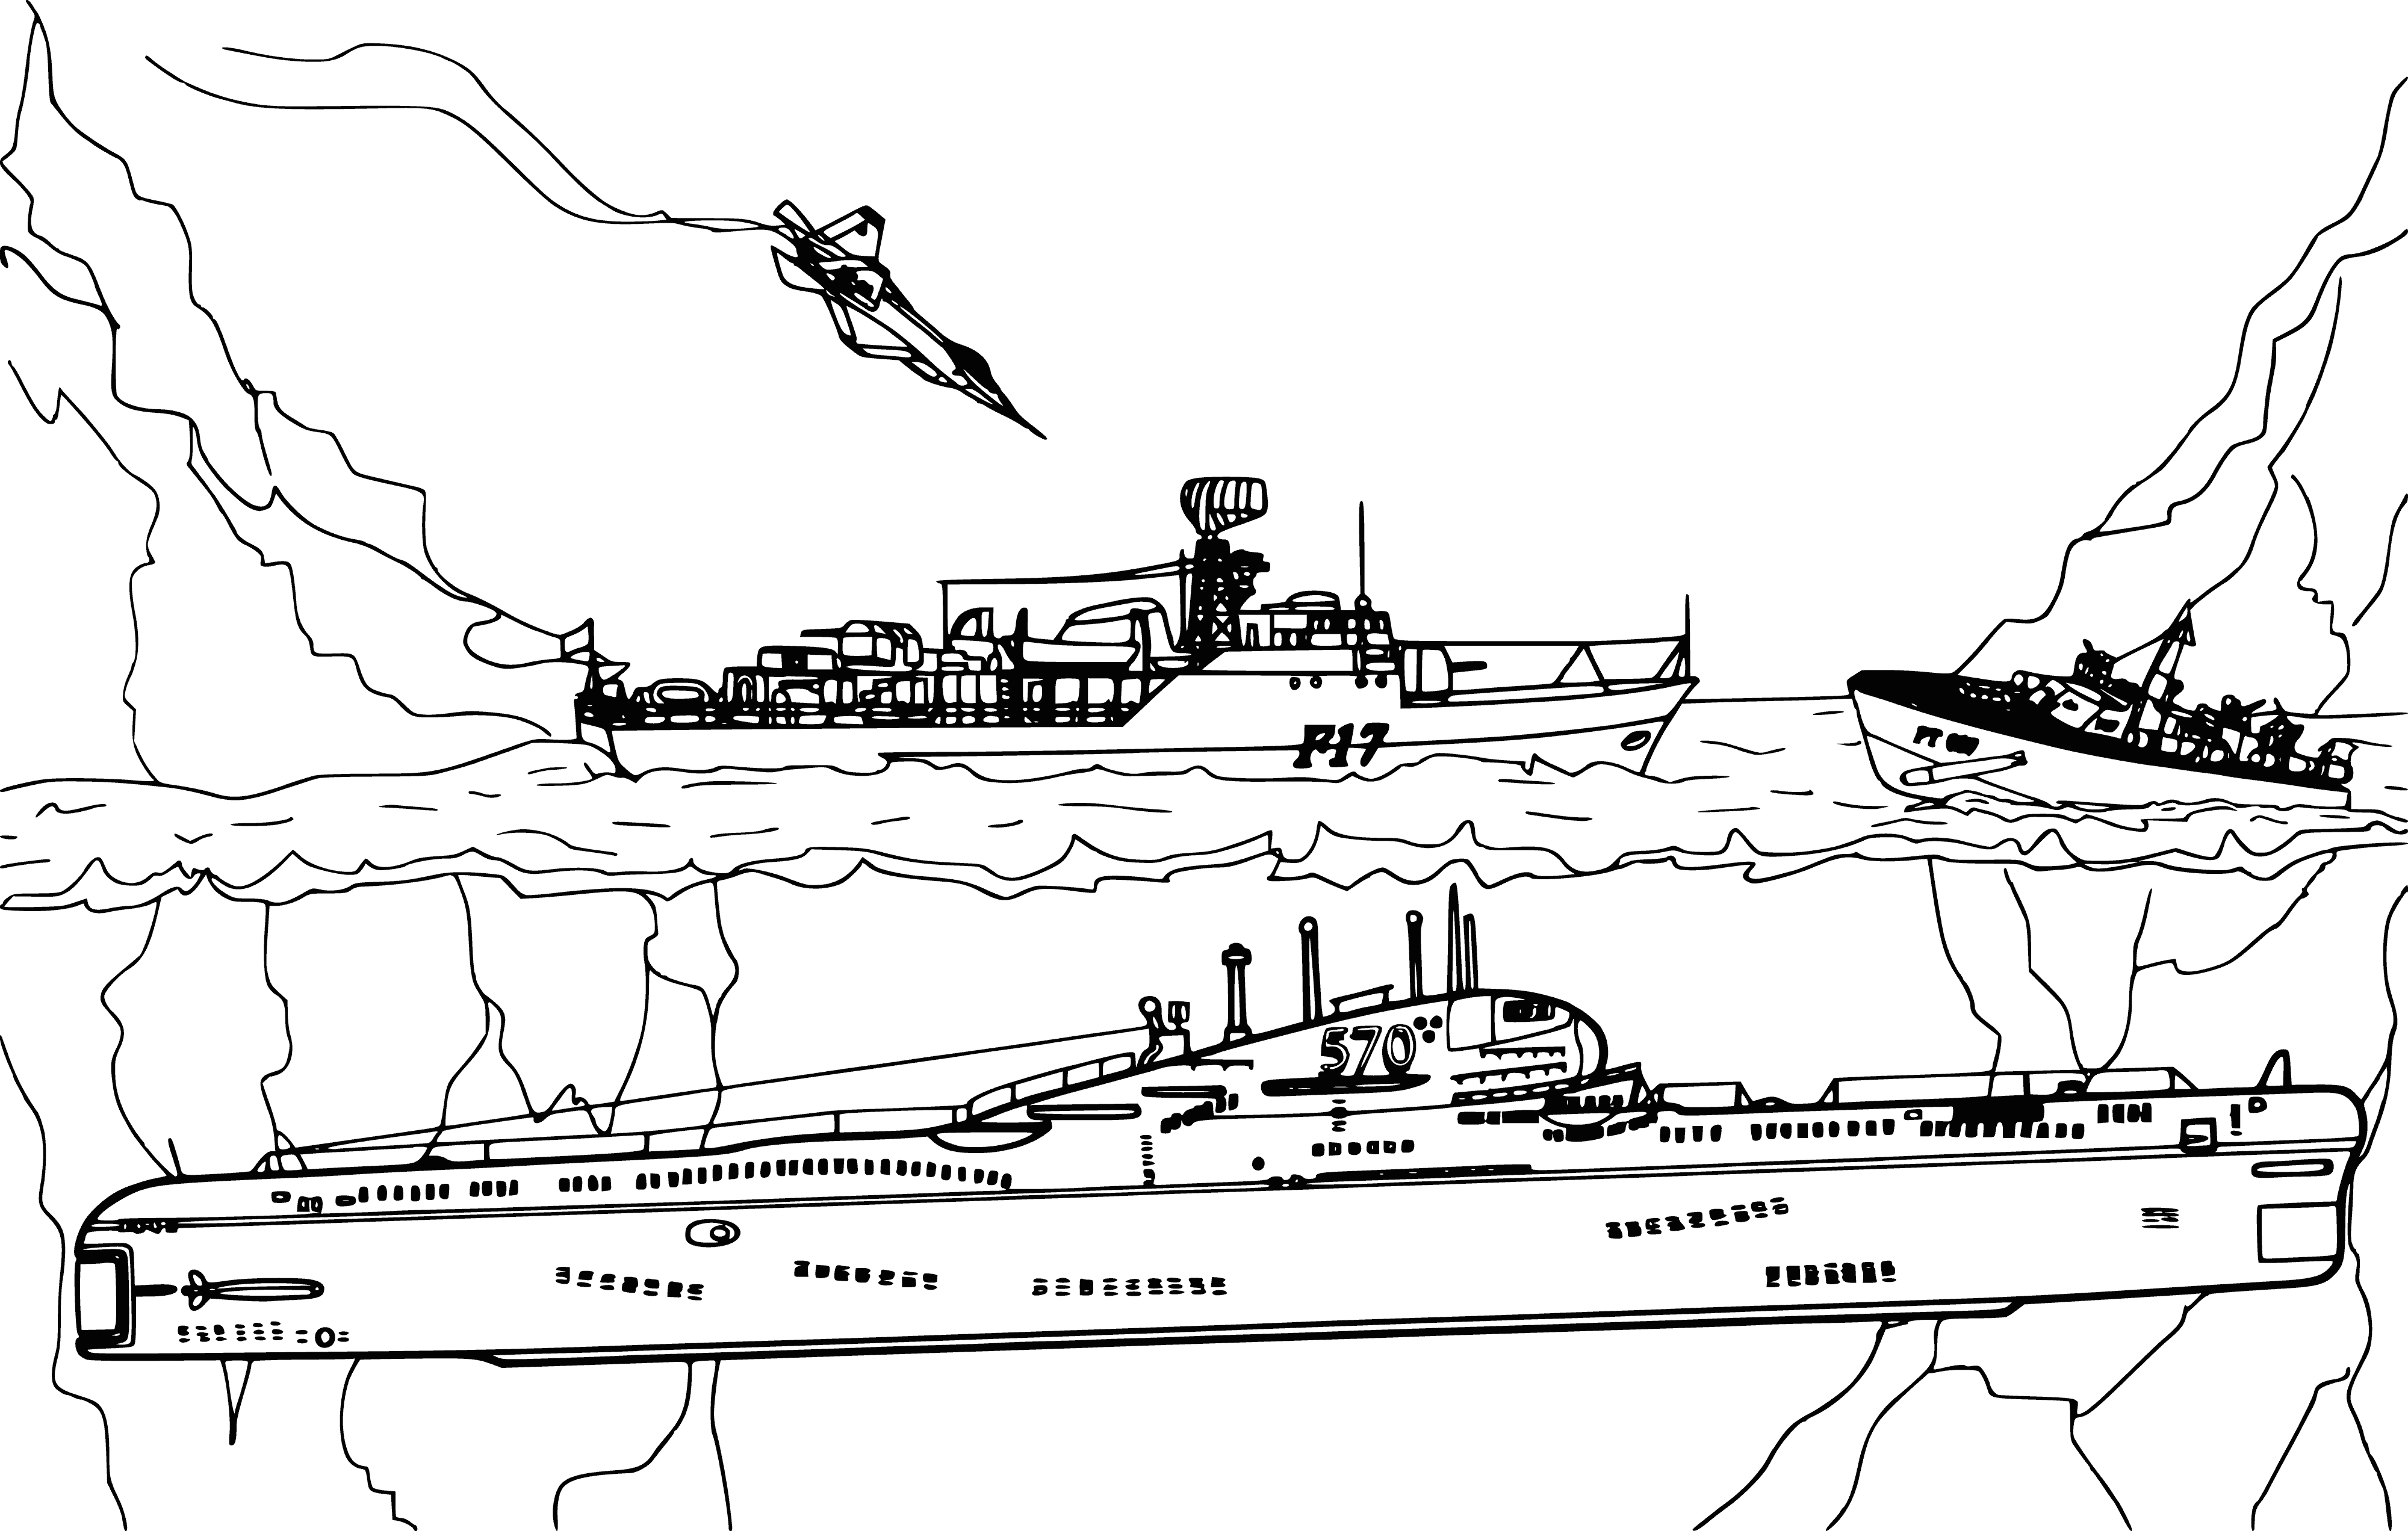 coloring page: Submarine missile carrier shown with missile ready to fire, surrounded by water.